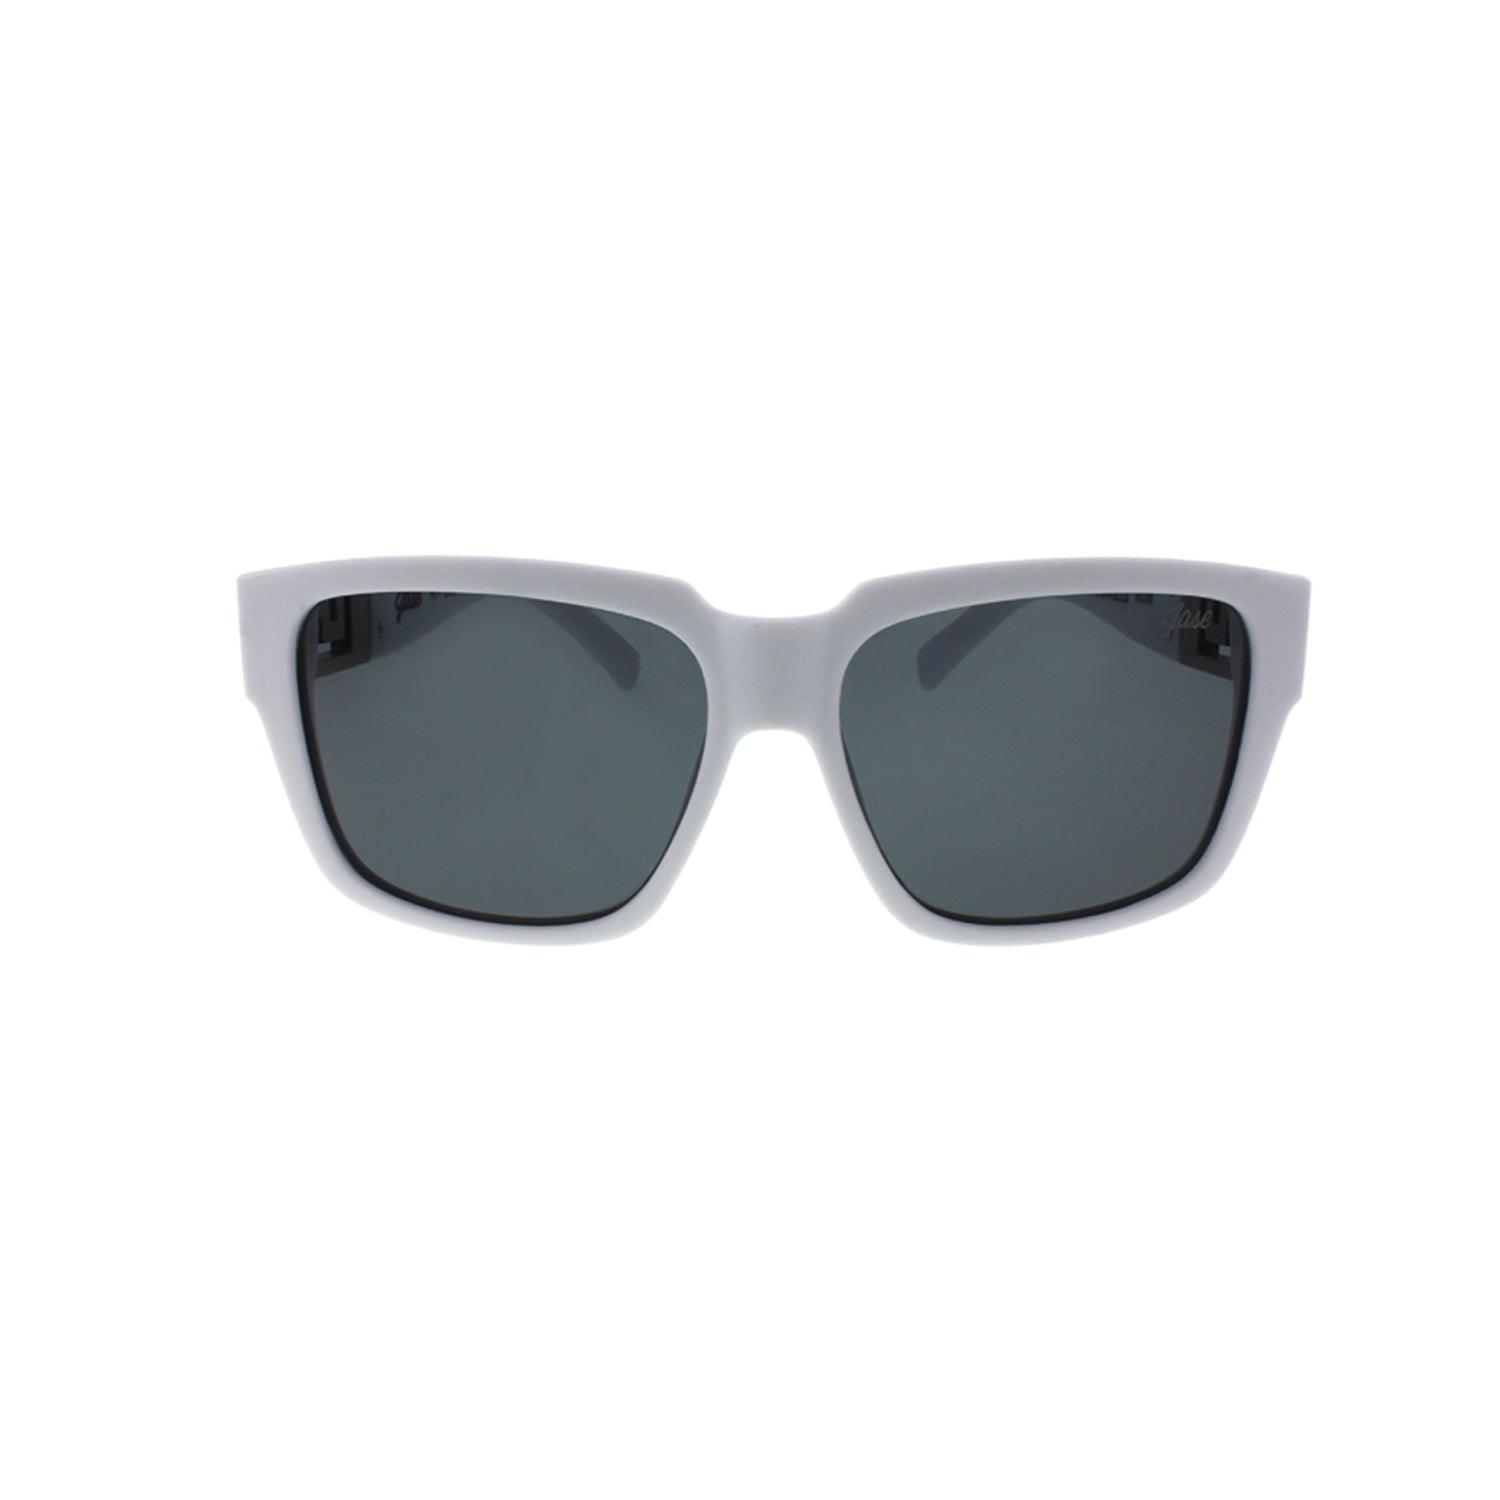 Jase New York Victor Sunglasses in Matte White - Lacatang Market